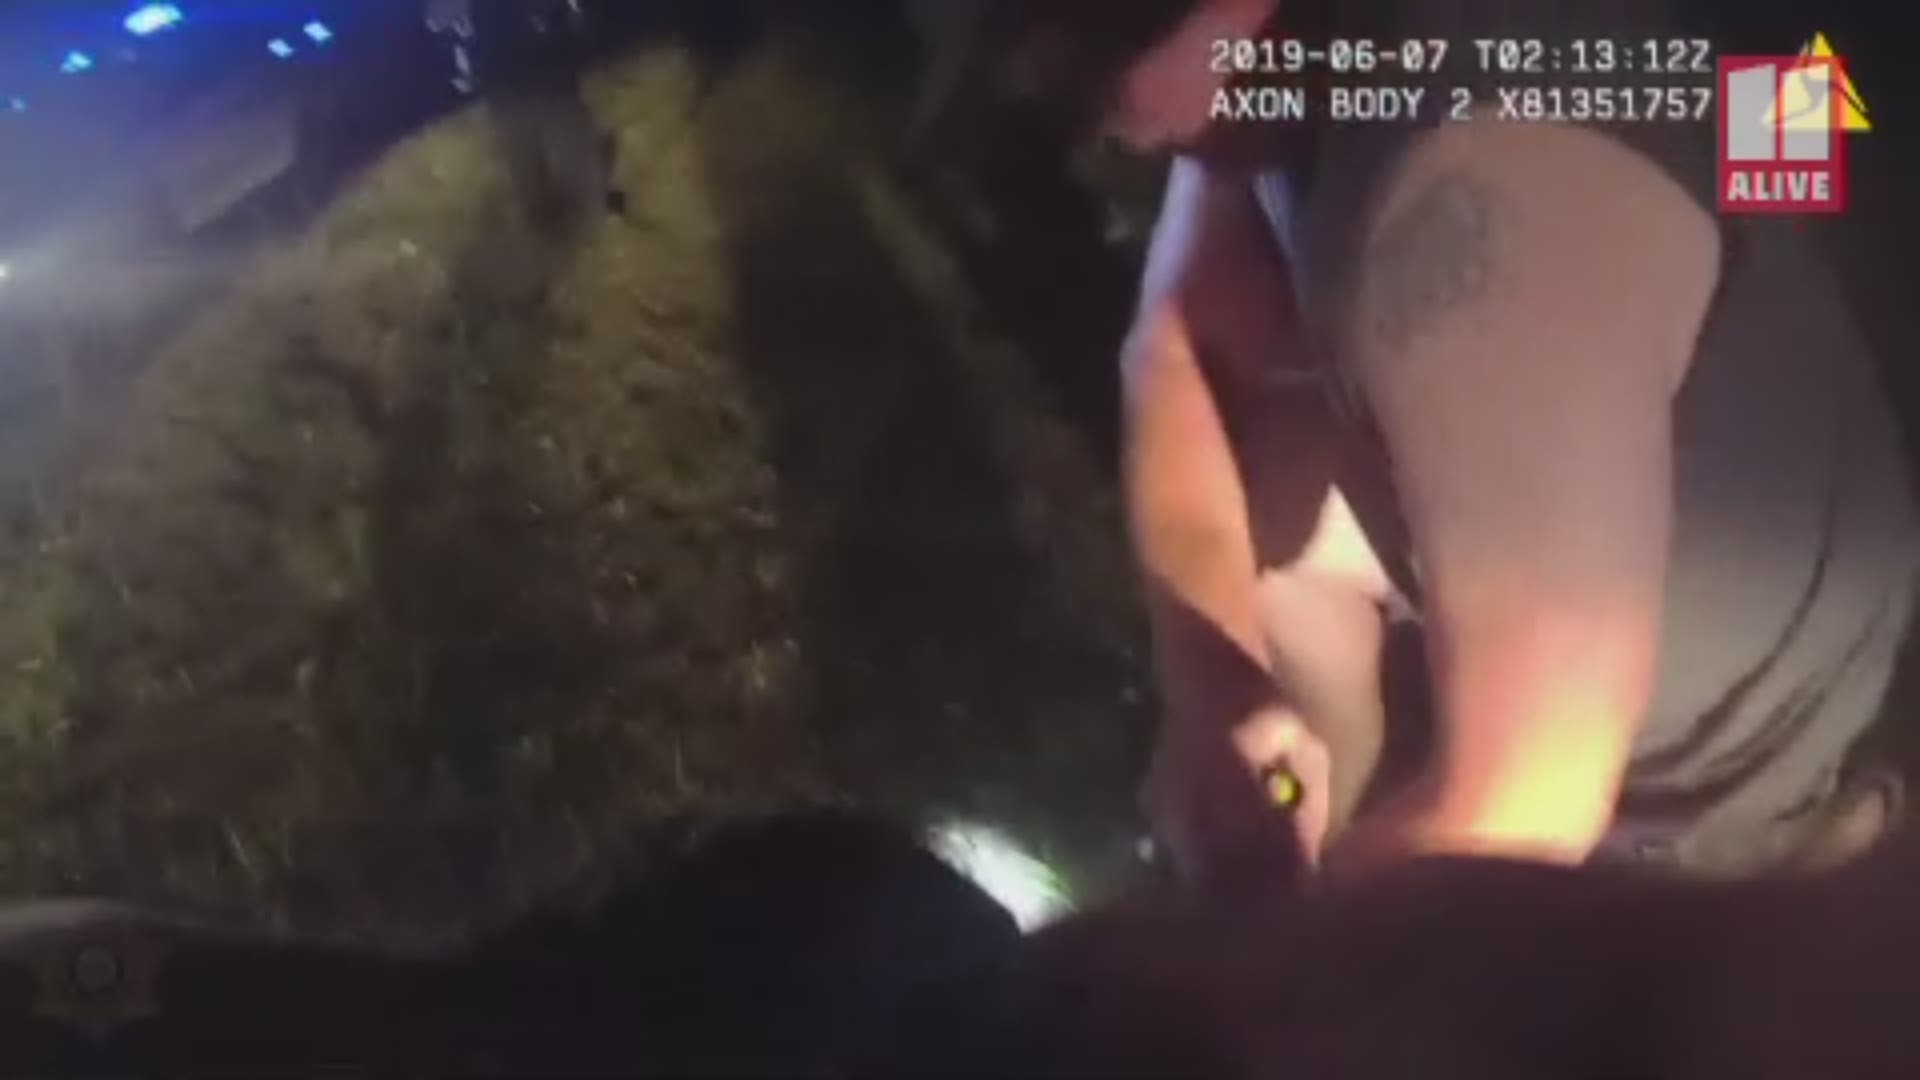 Forsyth County Sheriff's Department released body camera video showing the moment they rescued a baby from a plastic bag in the woods on June 6.